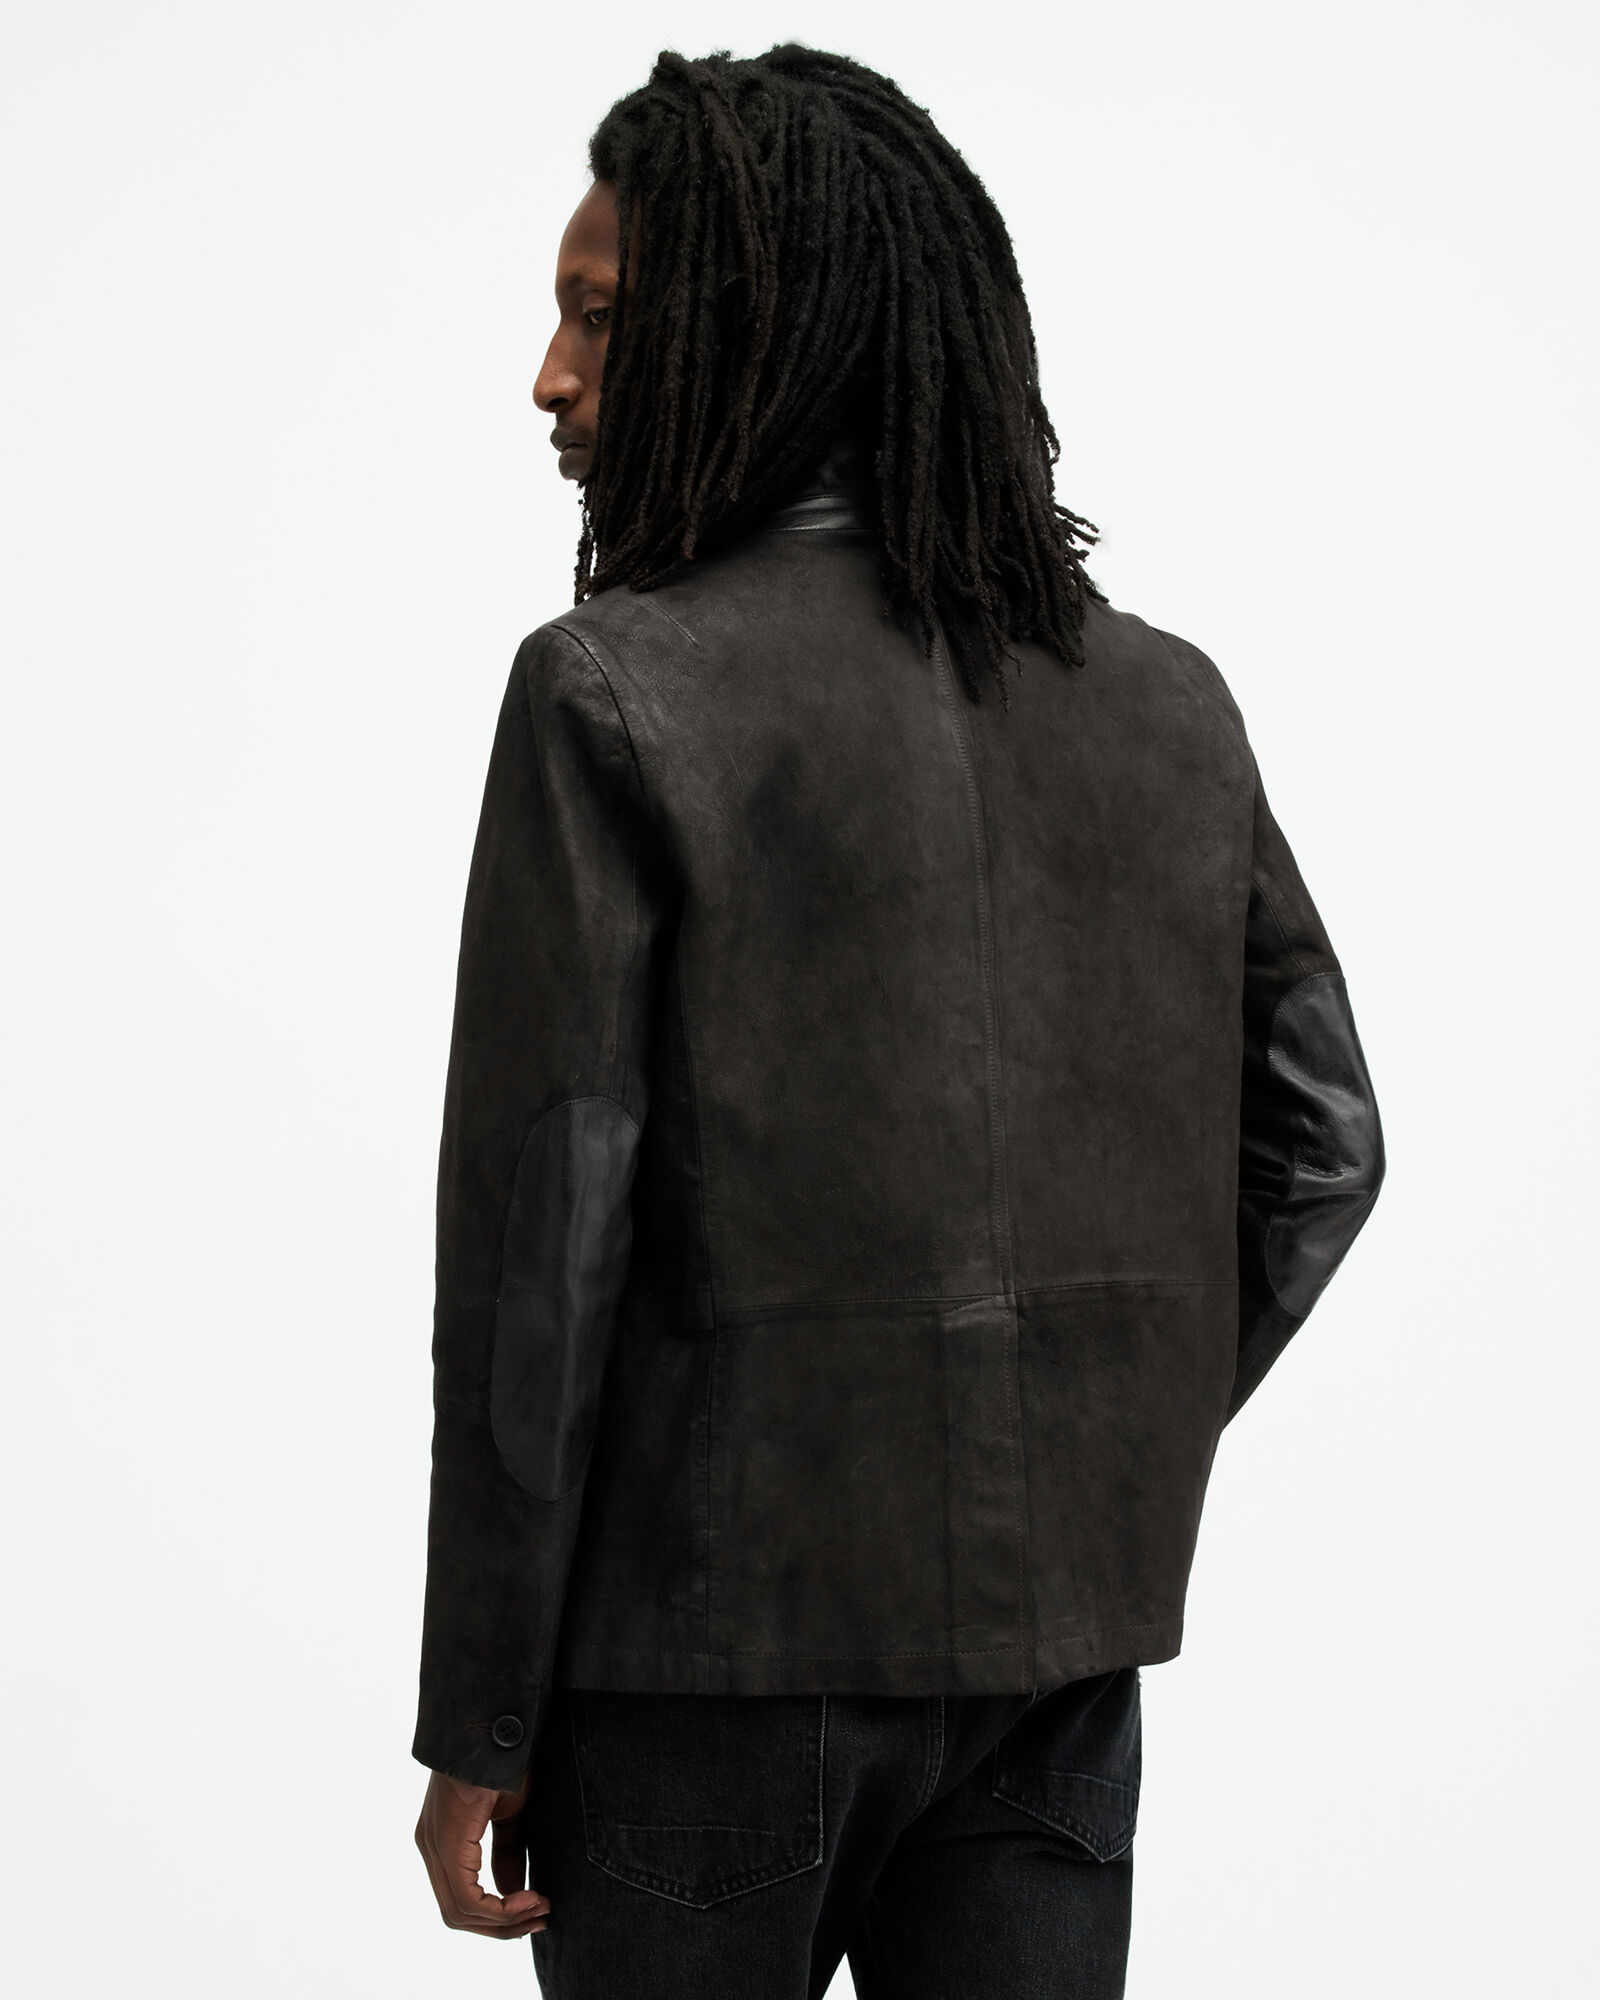 Survey Waxed Suede Double Layer Blazer